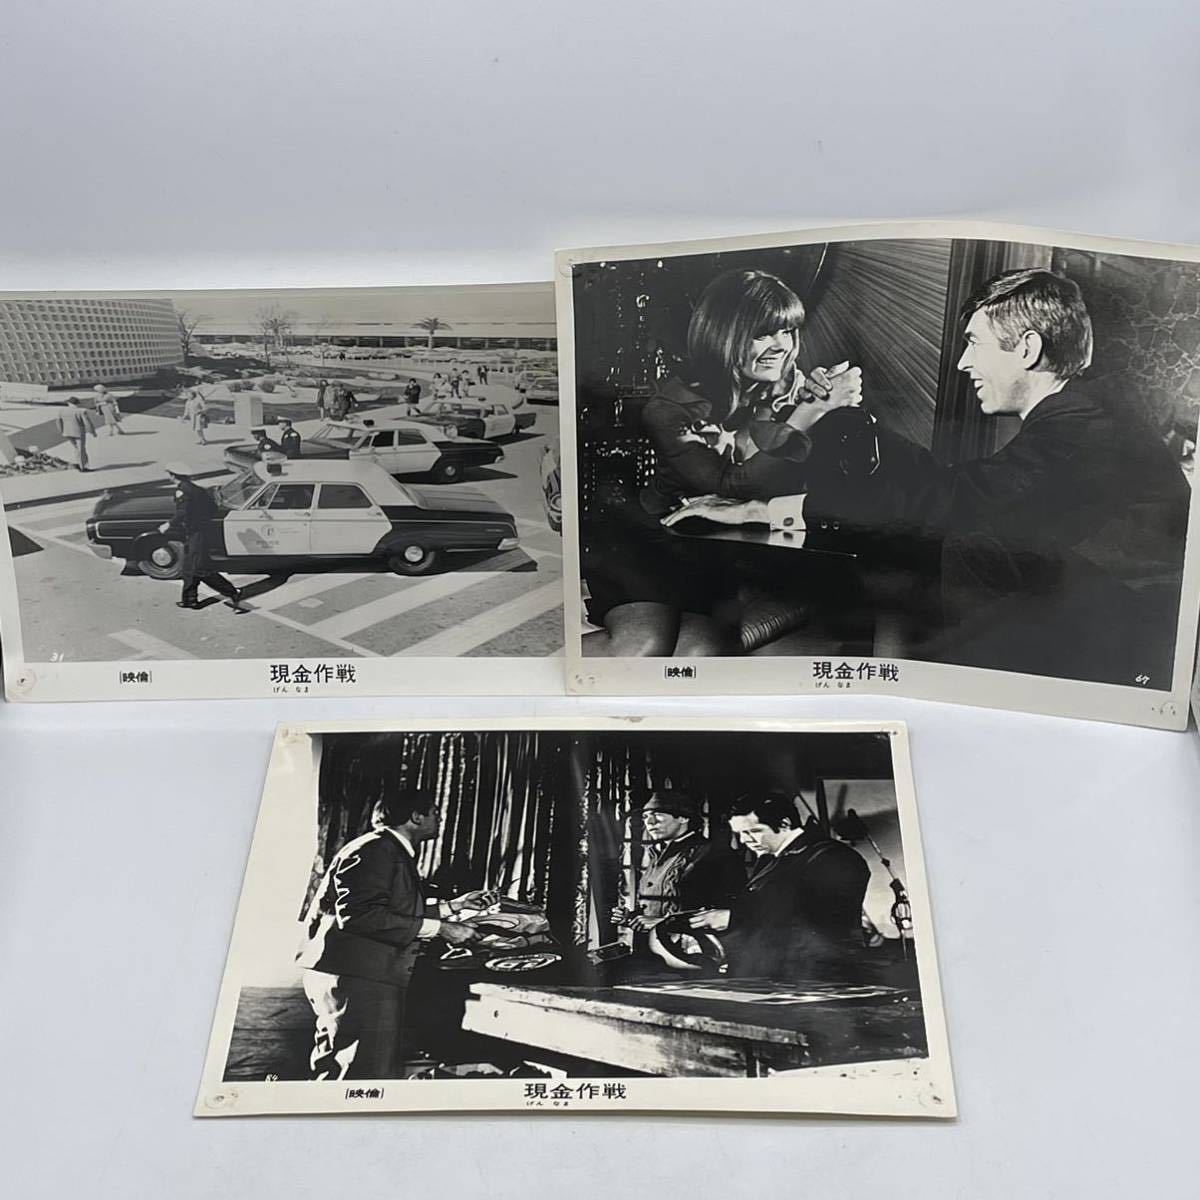 ★Super rare!!★ Movie Operation Cash / Large format still photo set / Photo / No color / Showa retro / Original / Not for sale / Envelope included Hard to find, movie, video, Movie related goods, photograph